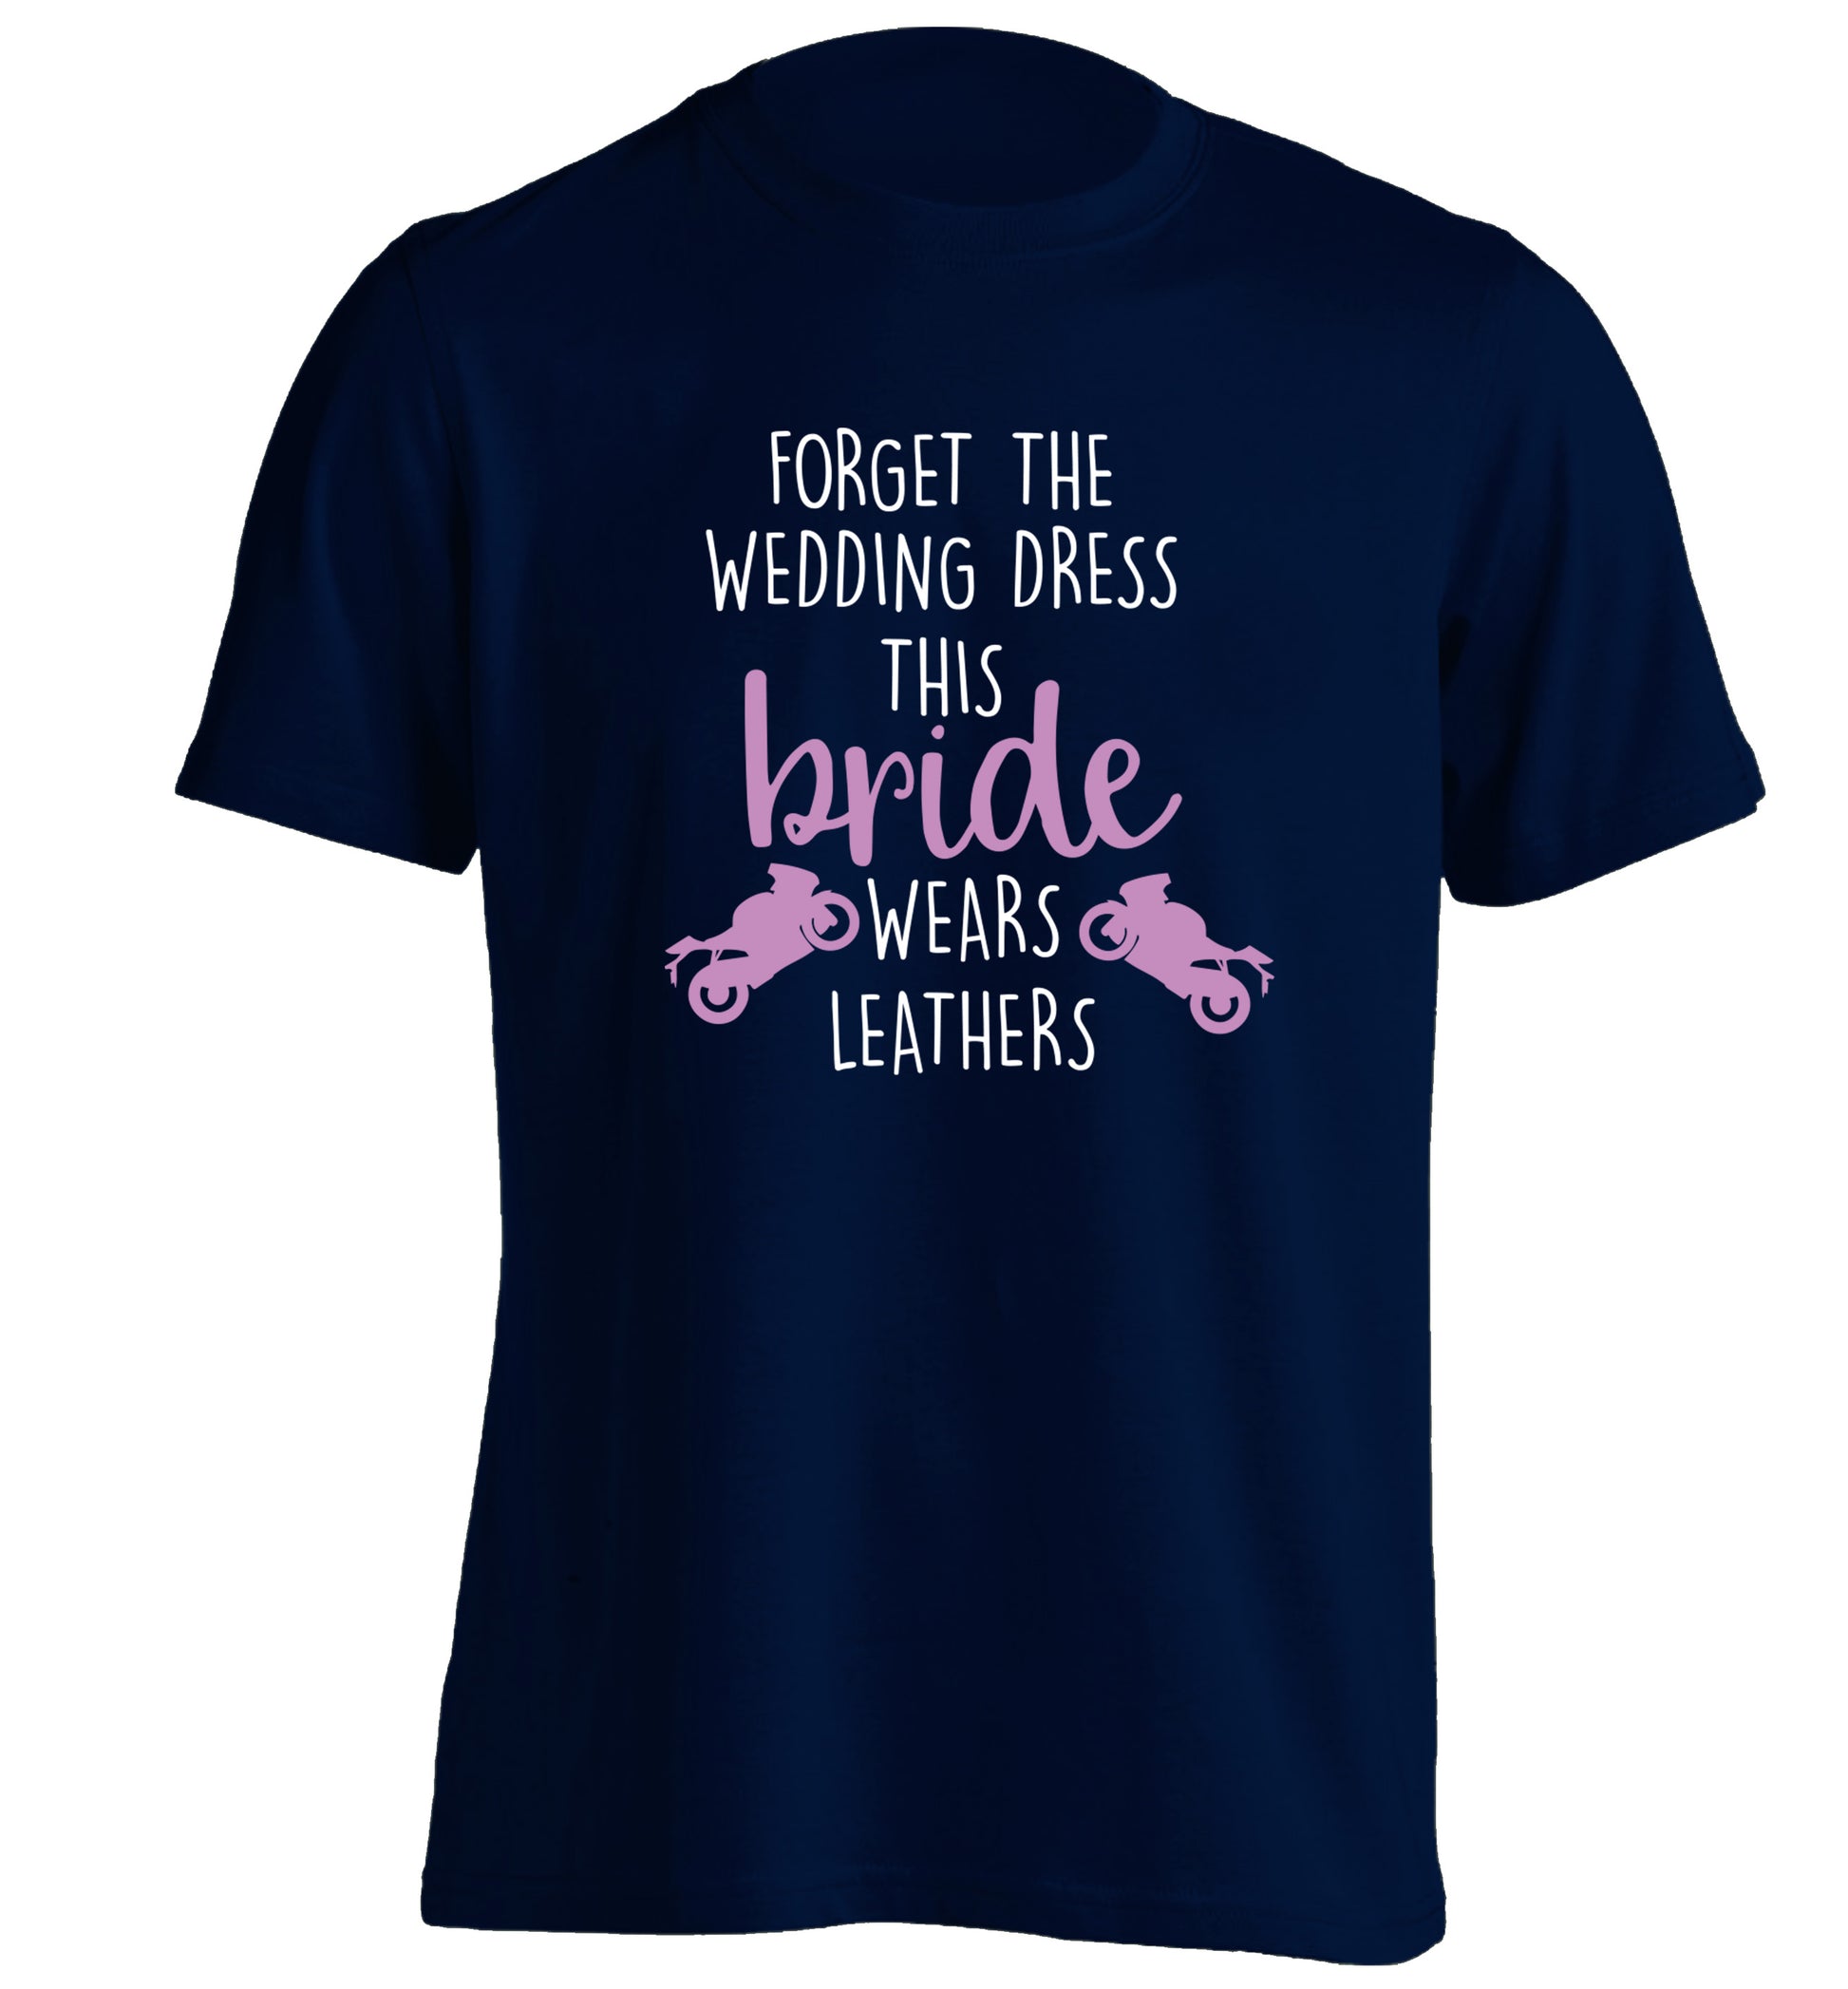 Forget the wedding dress this bride wears leathers adults unisex navy Tshirt 2XL